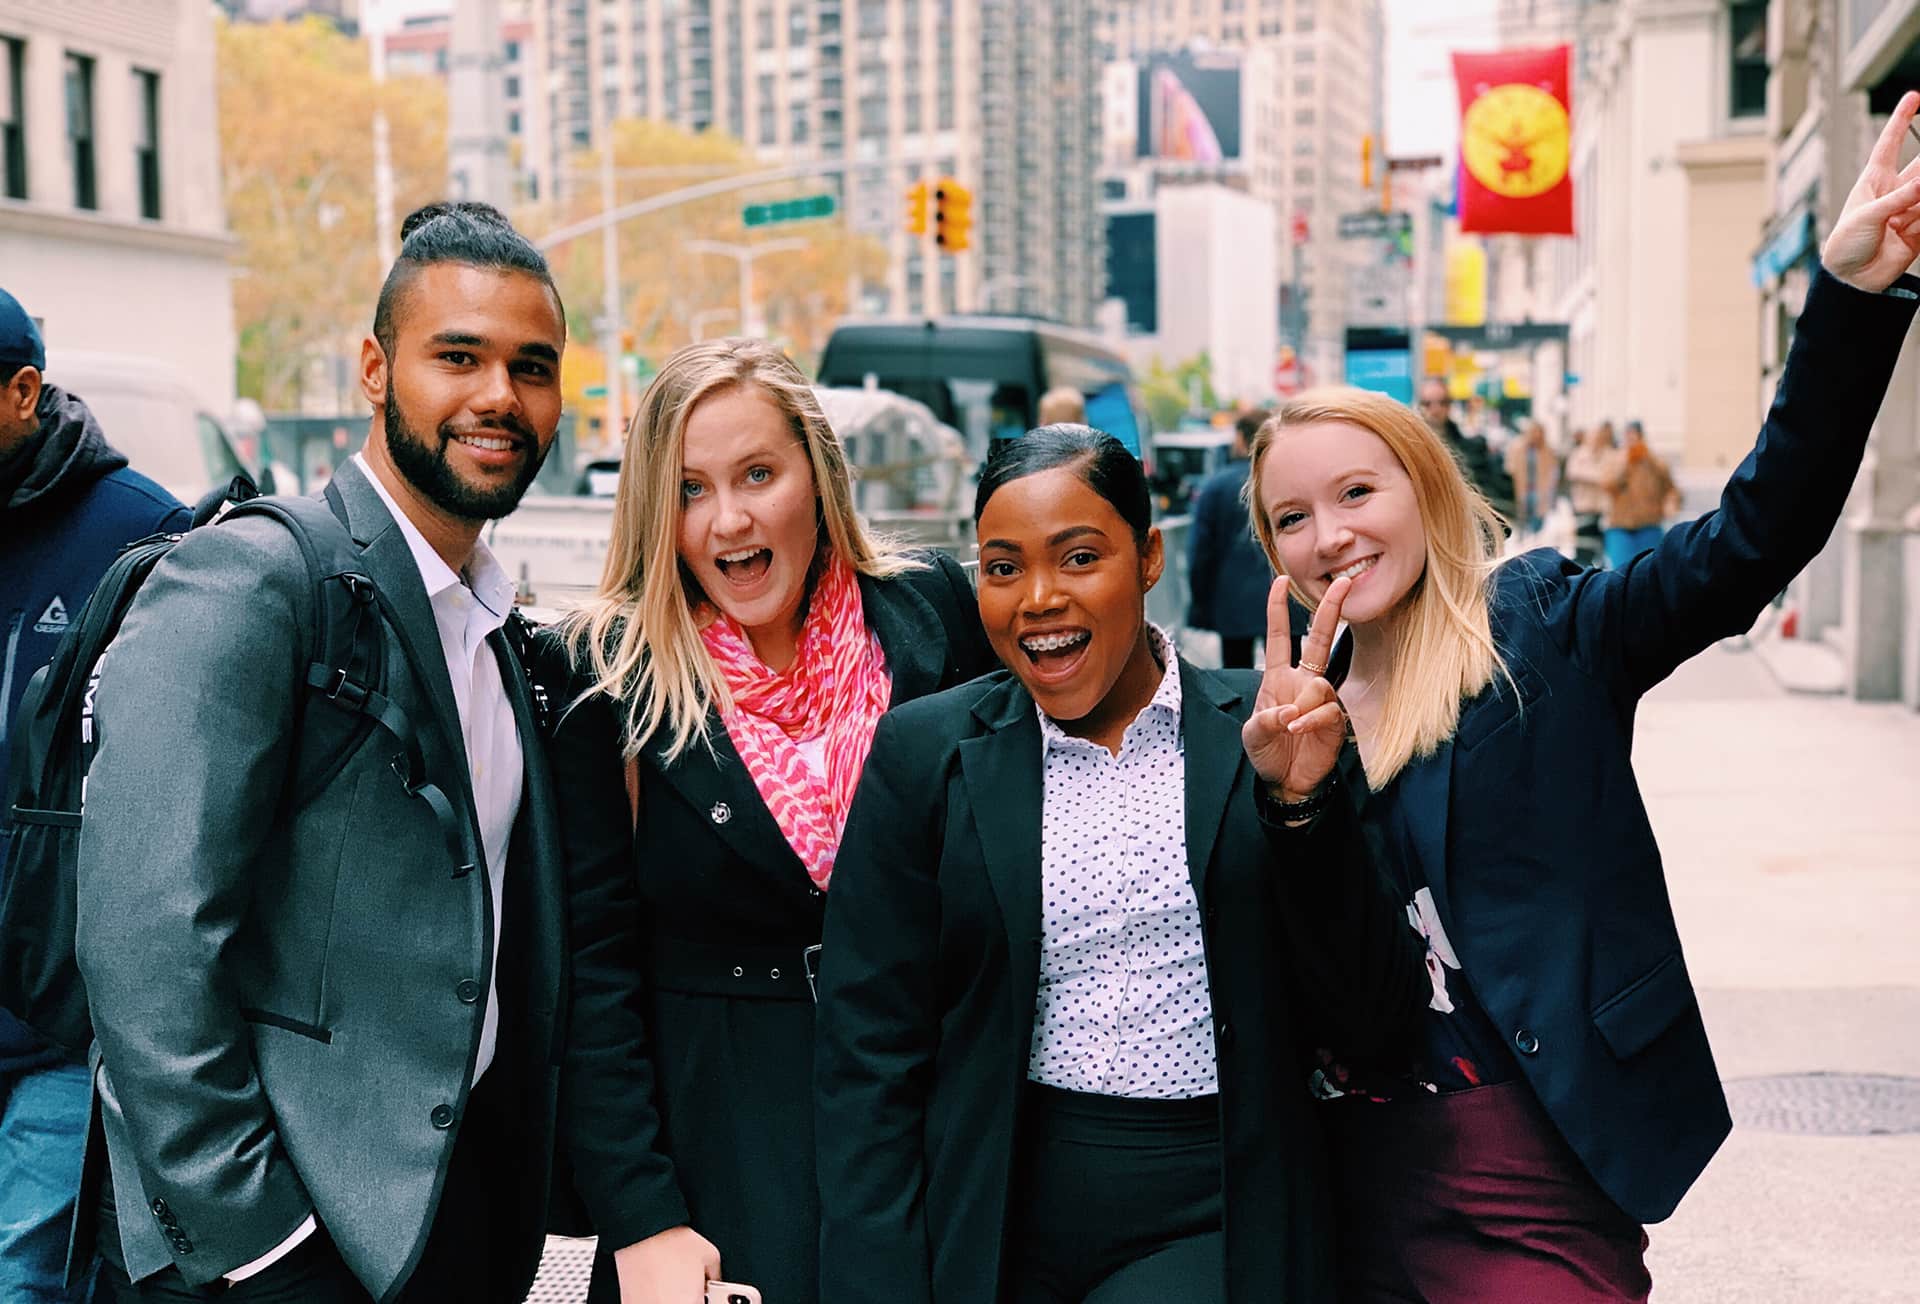 JWU students in New York City